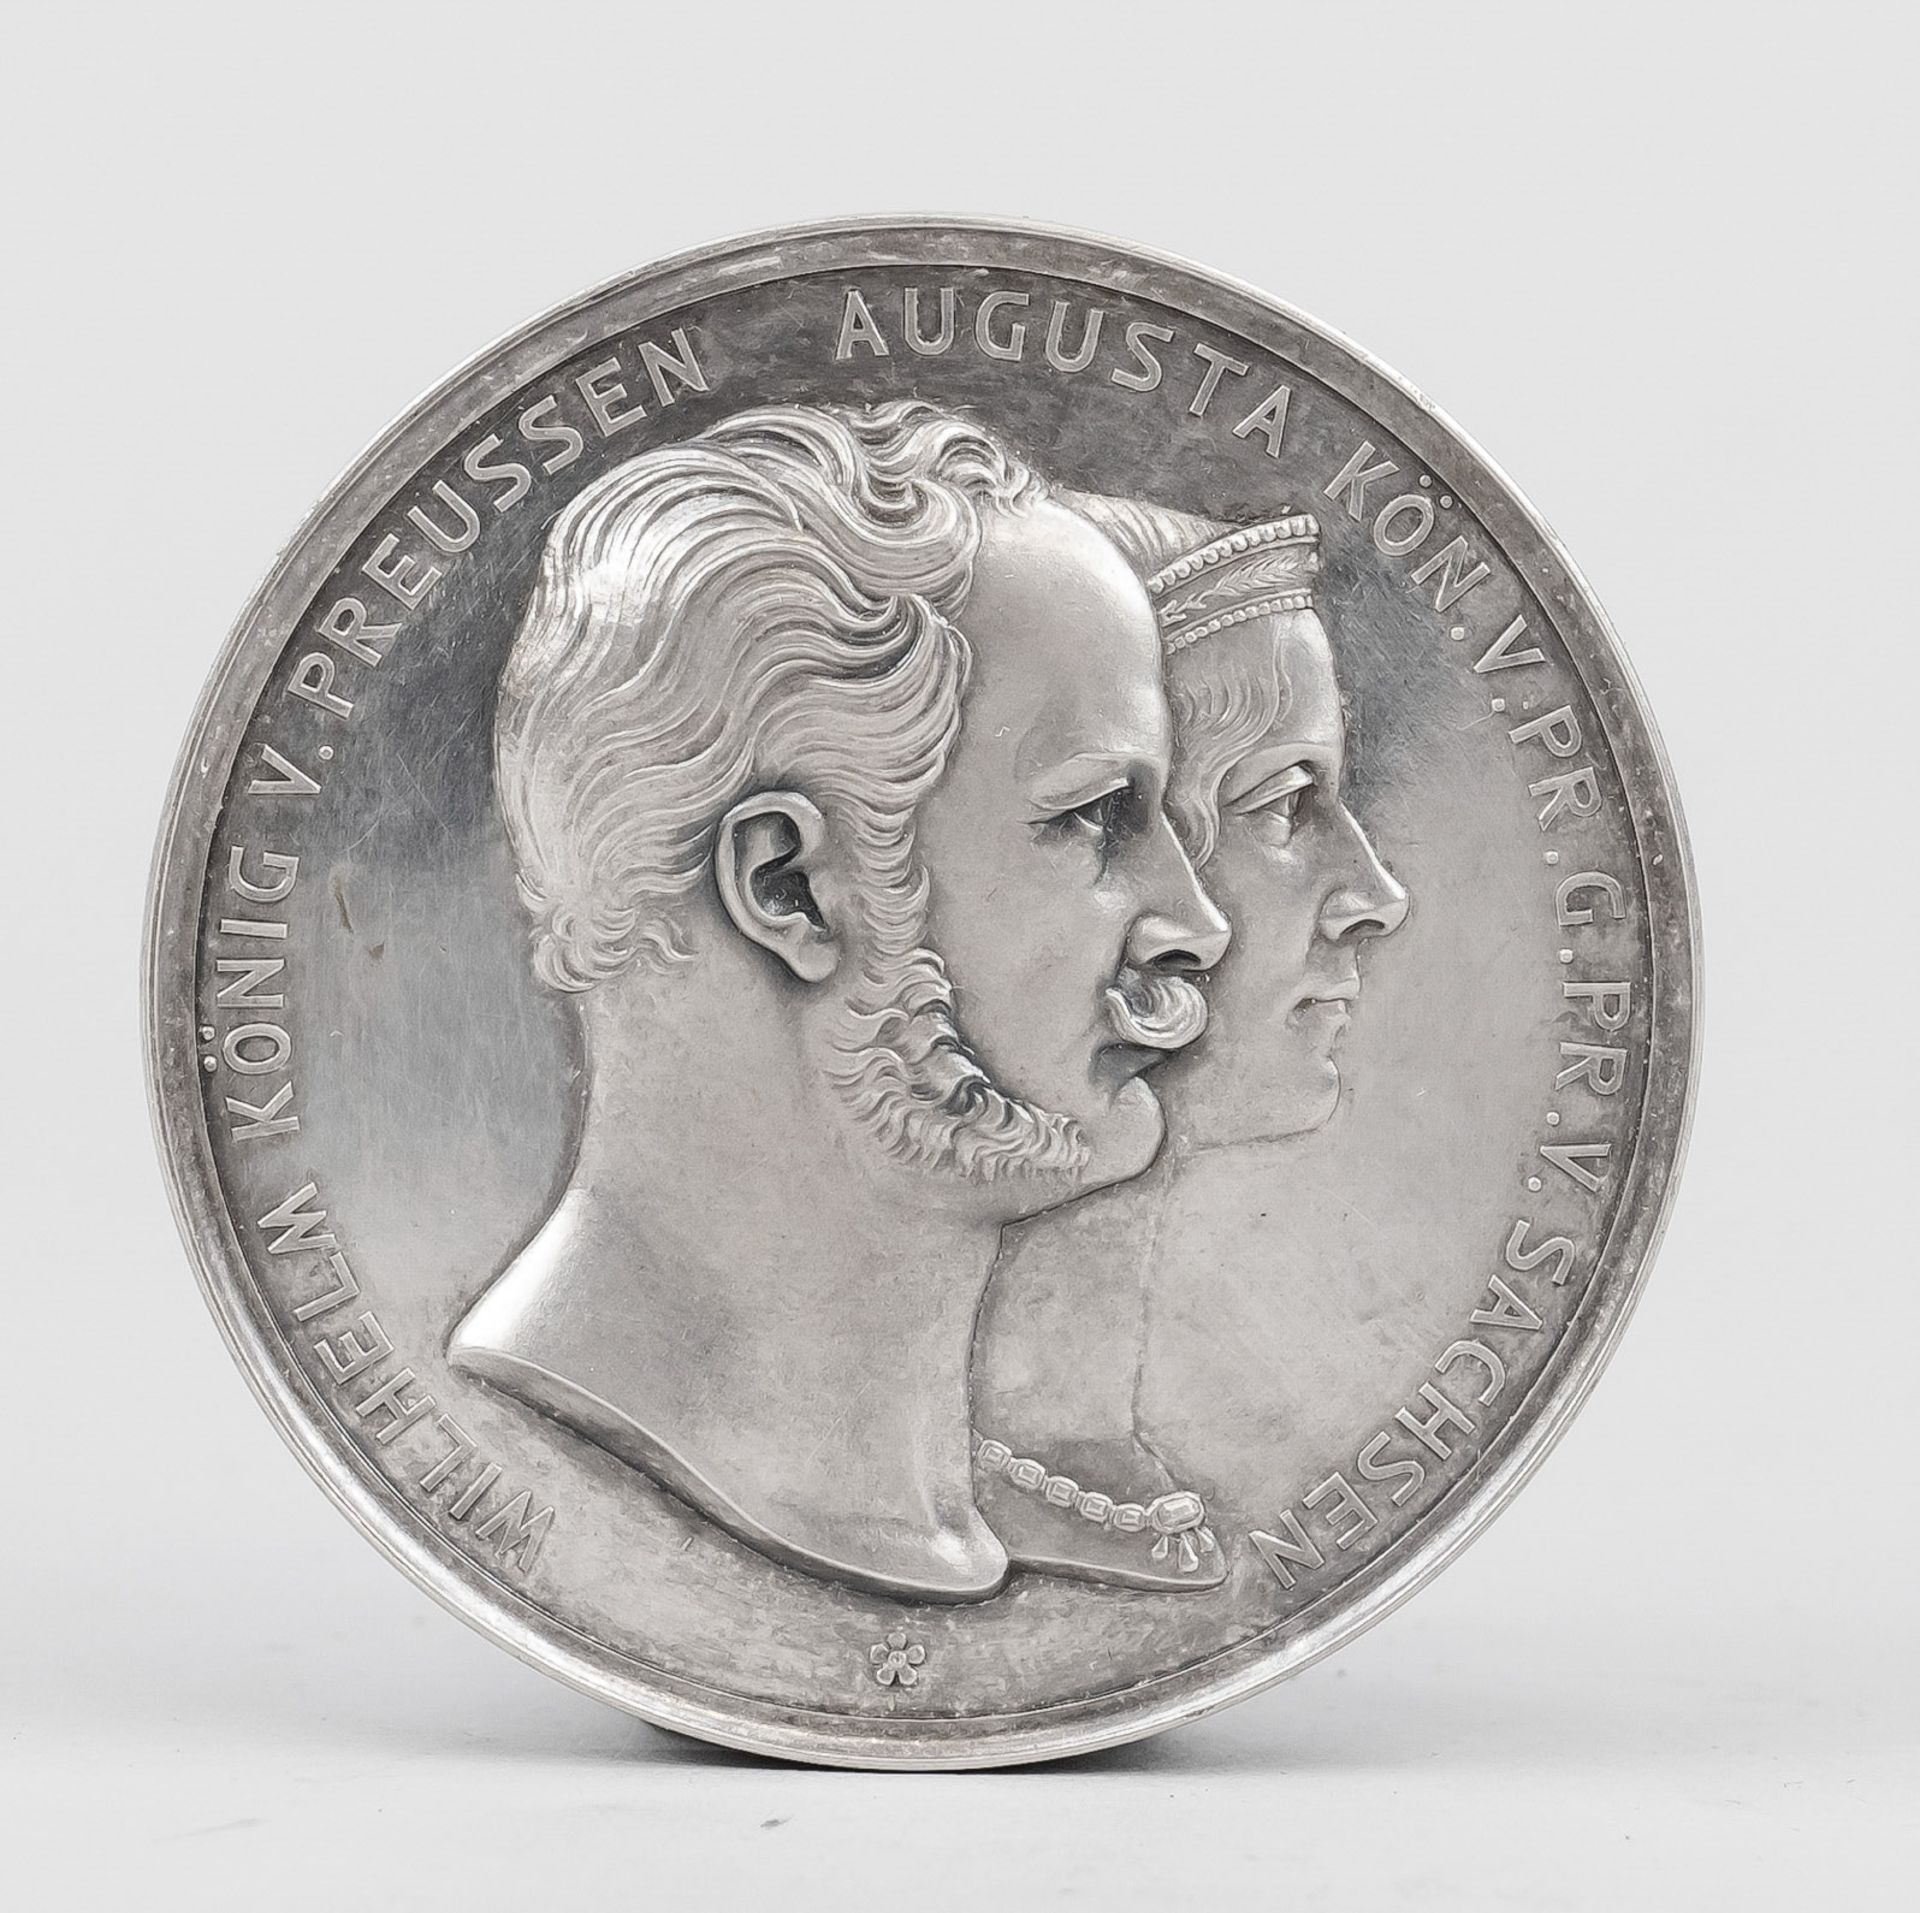 Commemorative medal for the silver wedding anniversary of Kaiser Wilhelm & Augusta in 1854, 19th